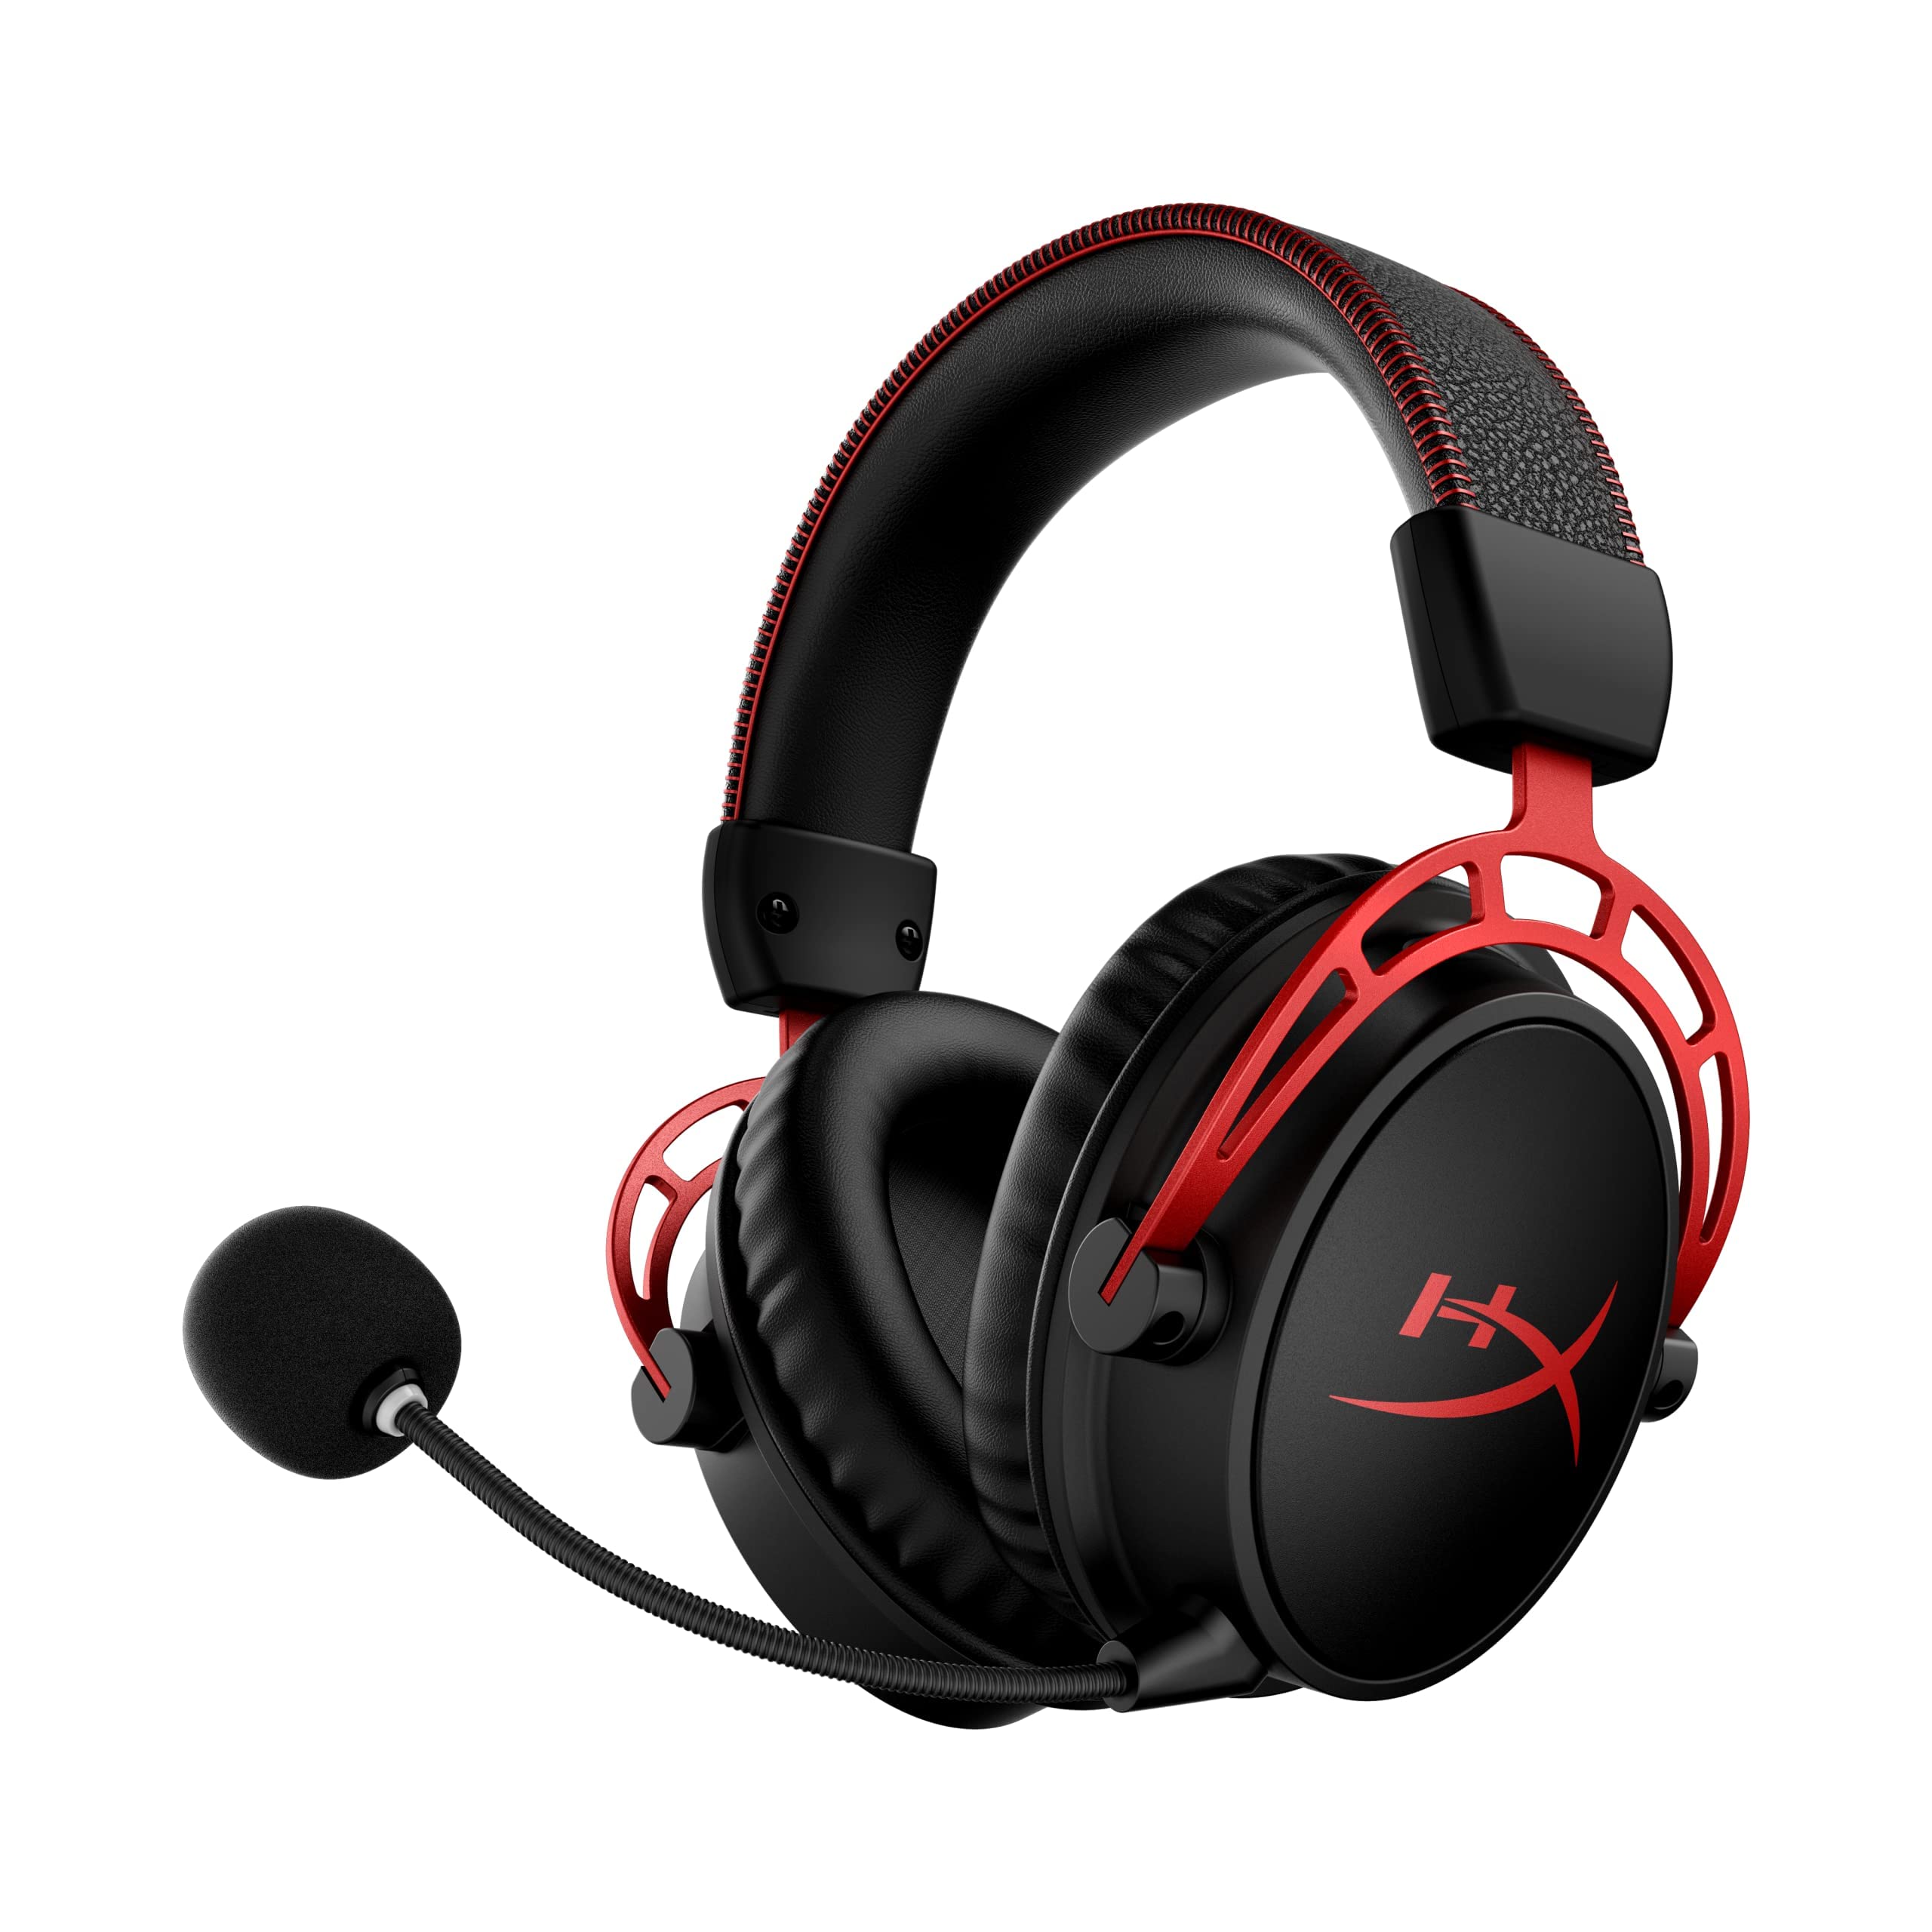 Visit the official HyperX website and download the latest firmware for the Cloud Alpha headset.
Connect the headset to a computer using the provided USB cable.